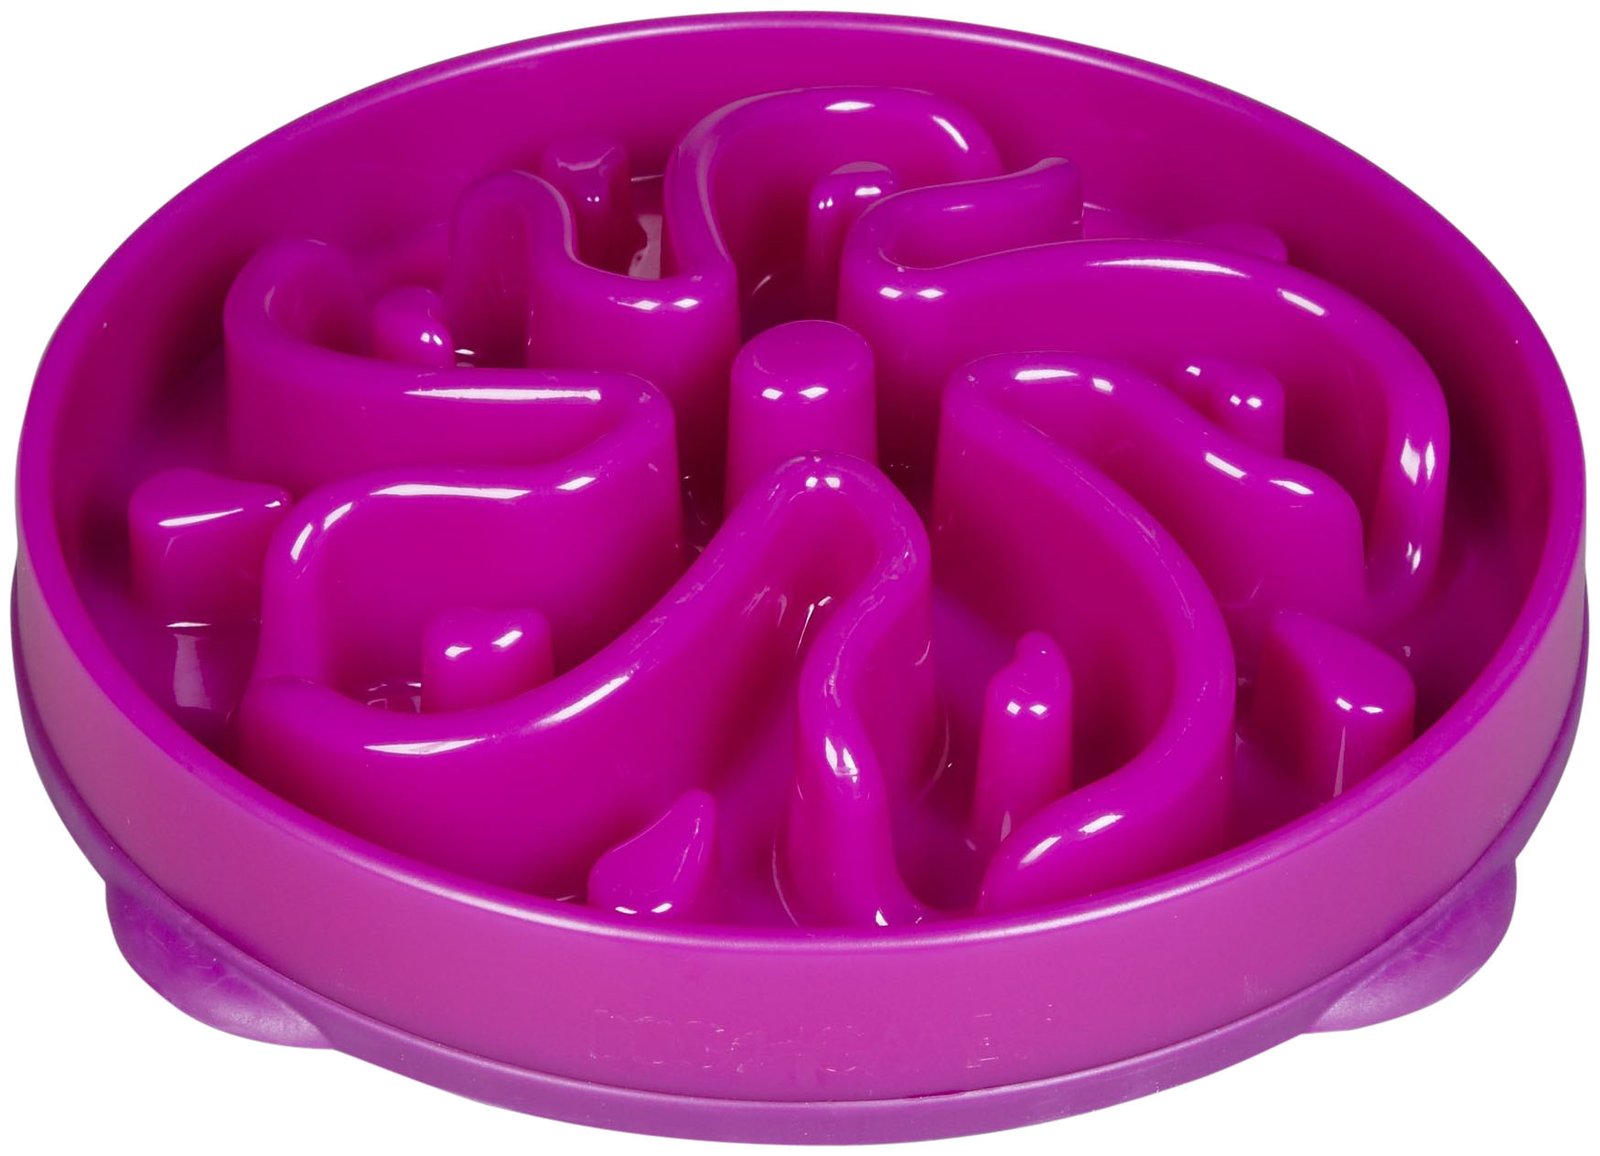 maze bowl for cats